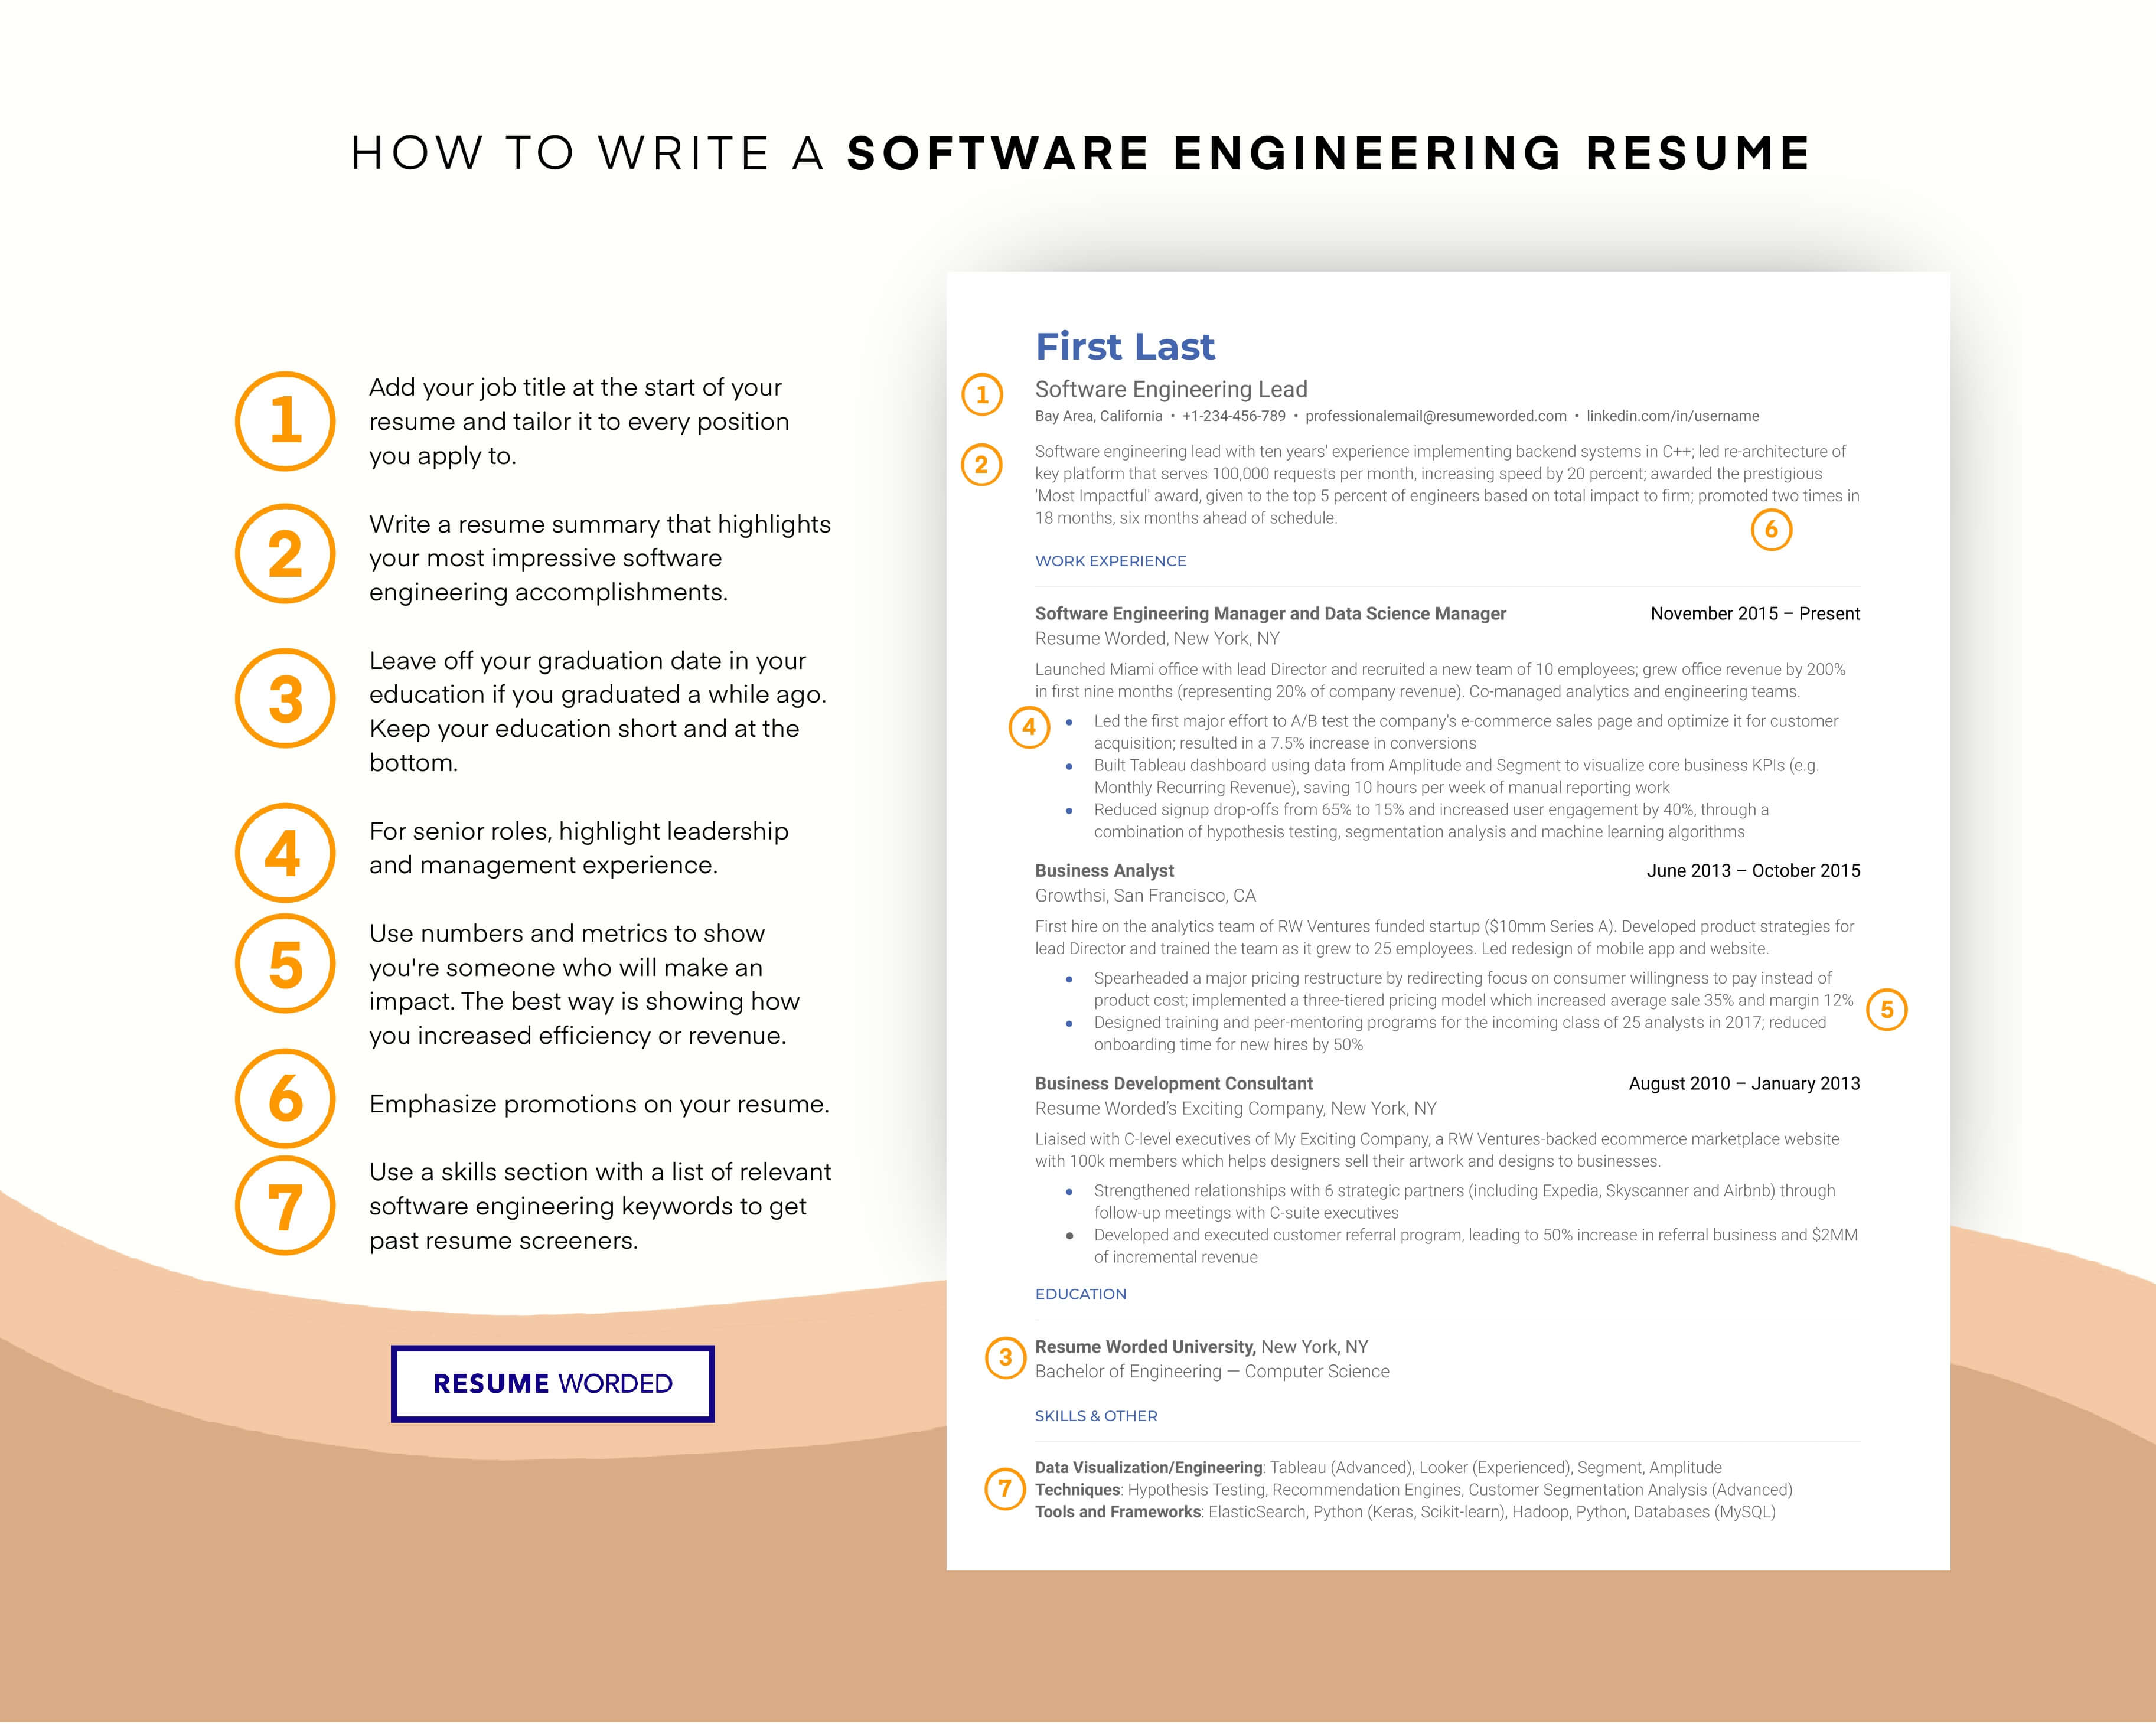 Use industry-specific software and skills - Creative Graphic Designer  CV